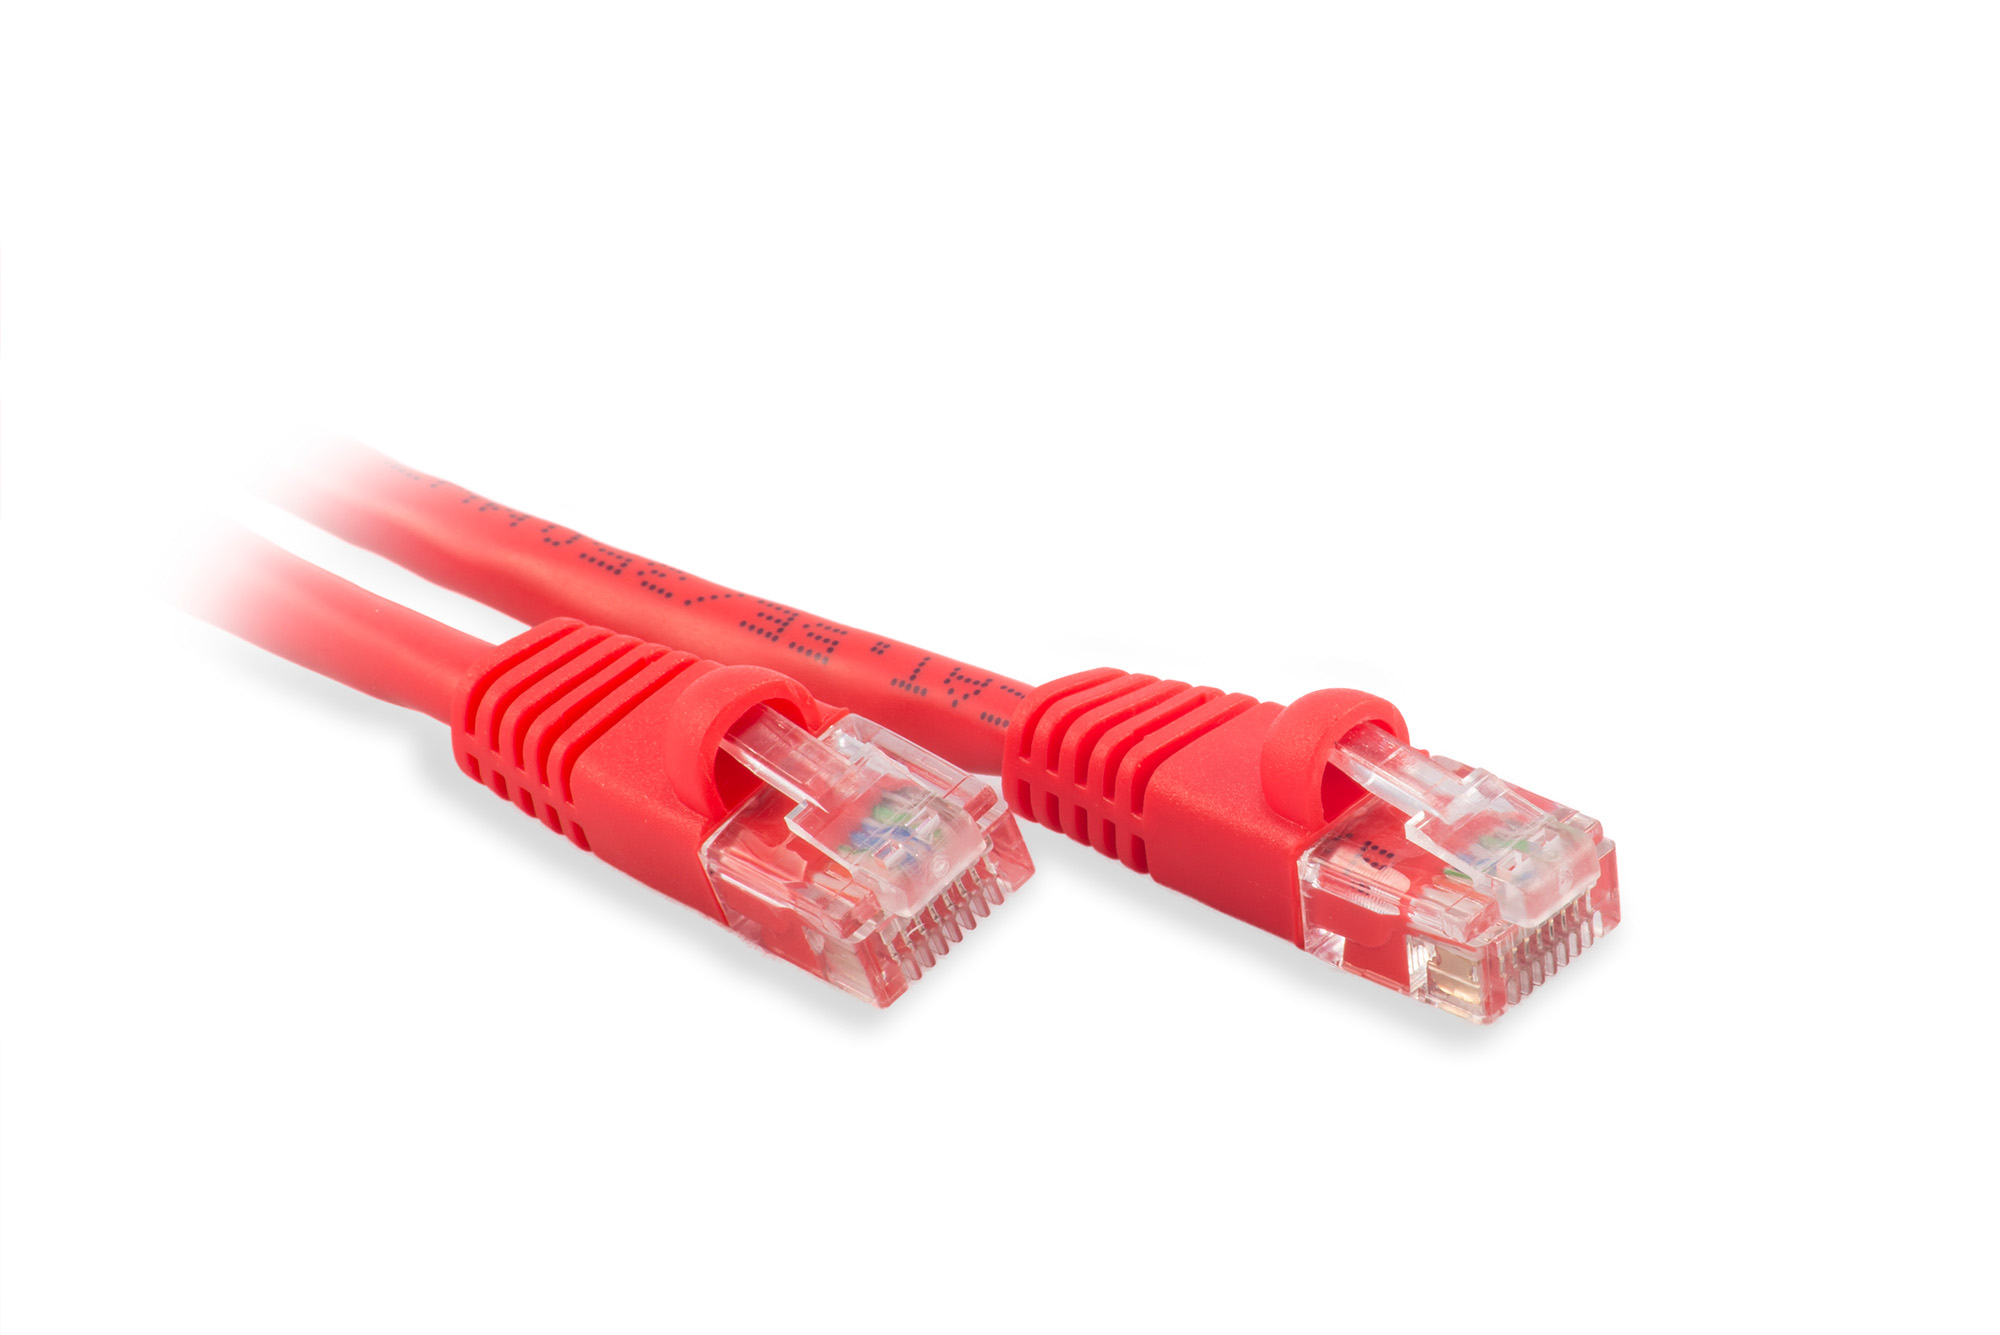 50ft Cat6 Ethernet Patch Cable - Red Color - Snagless Boot, Stranded, RJ45, 550Mhz, 24AWG